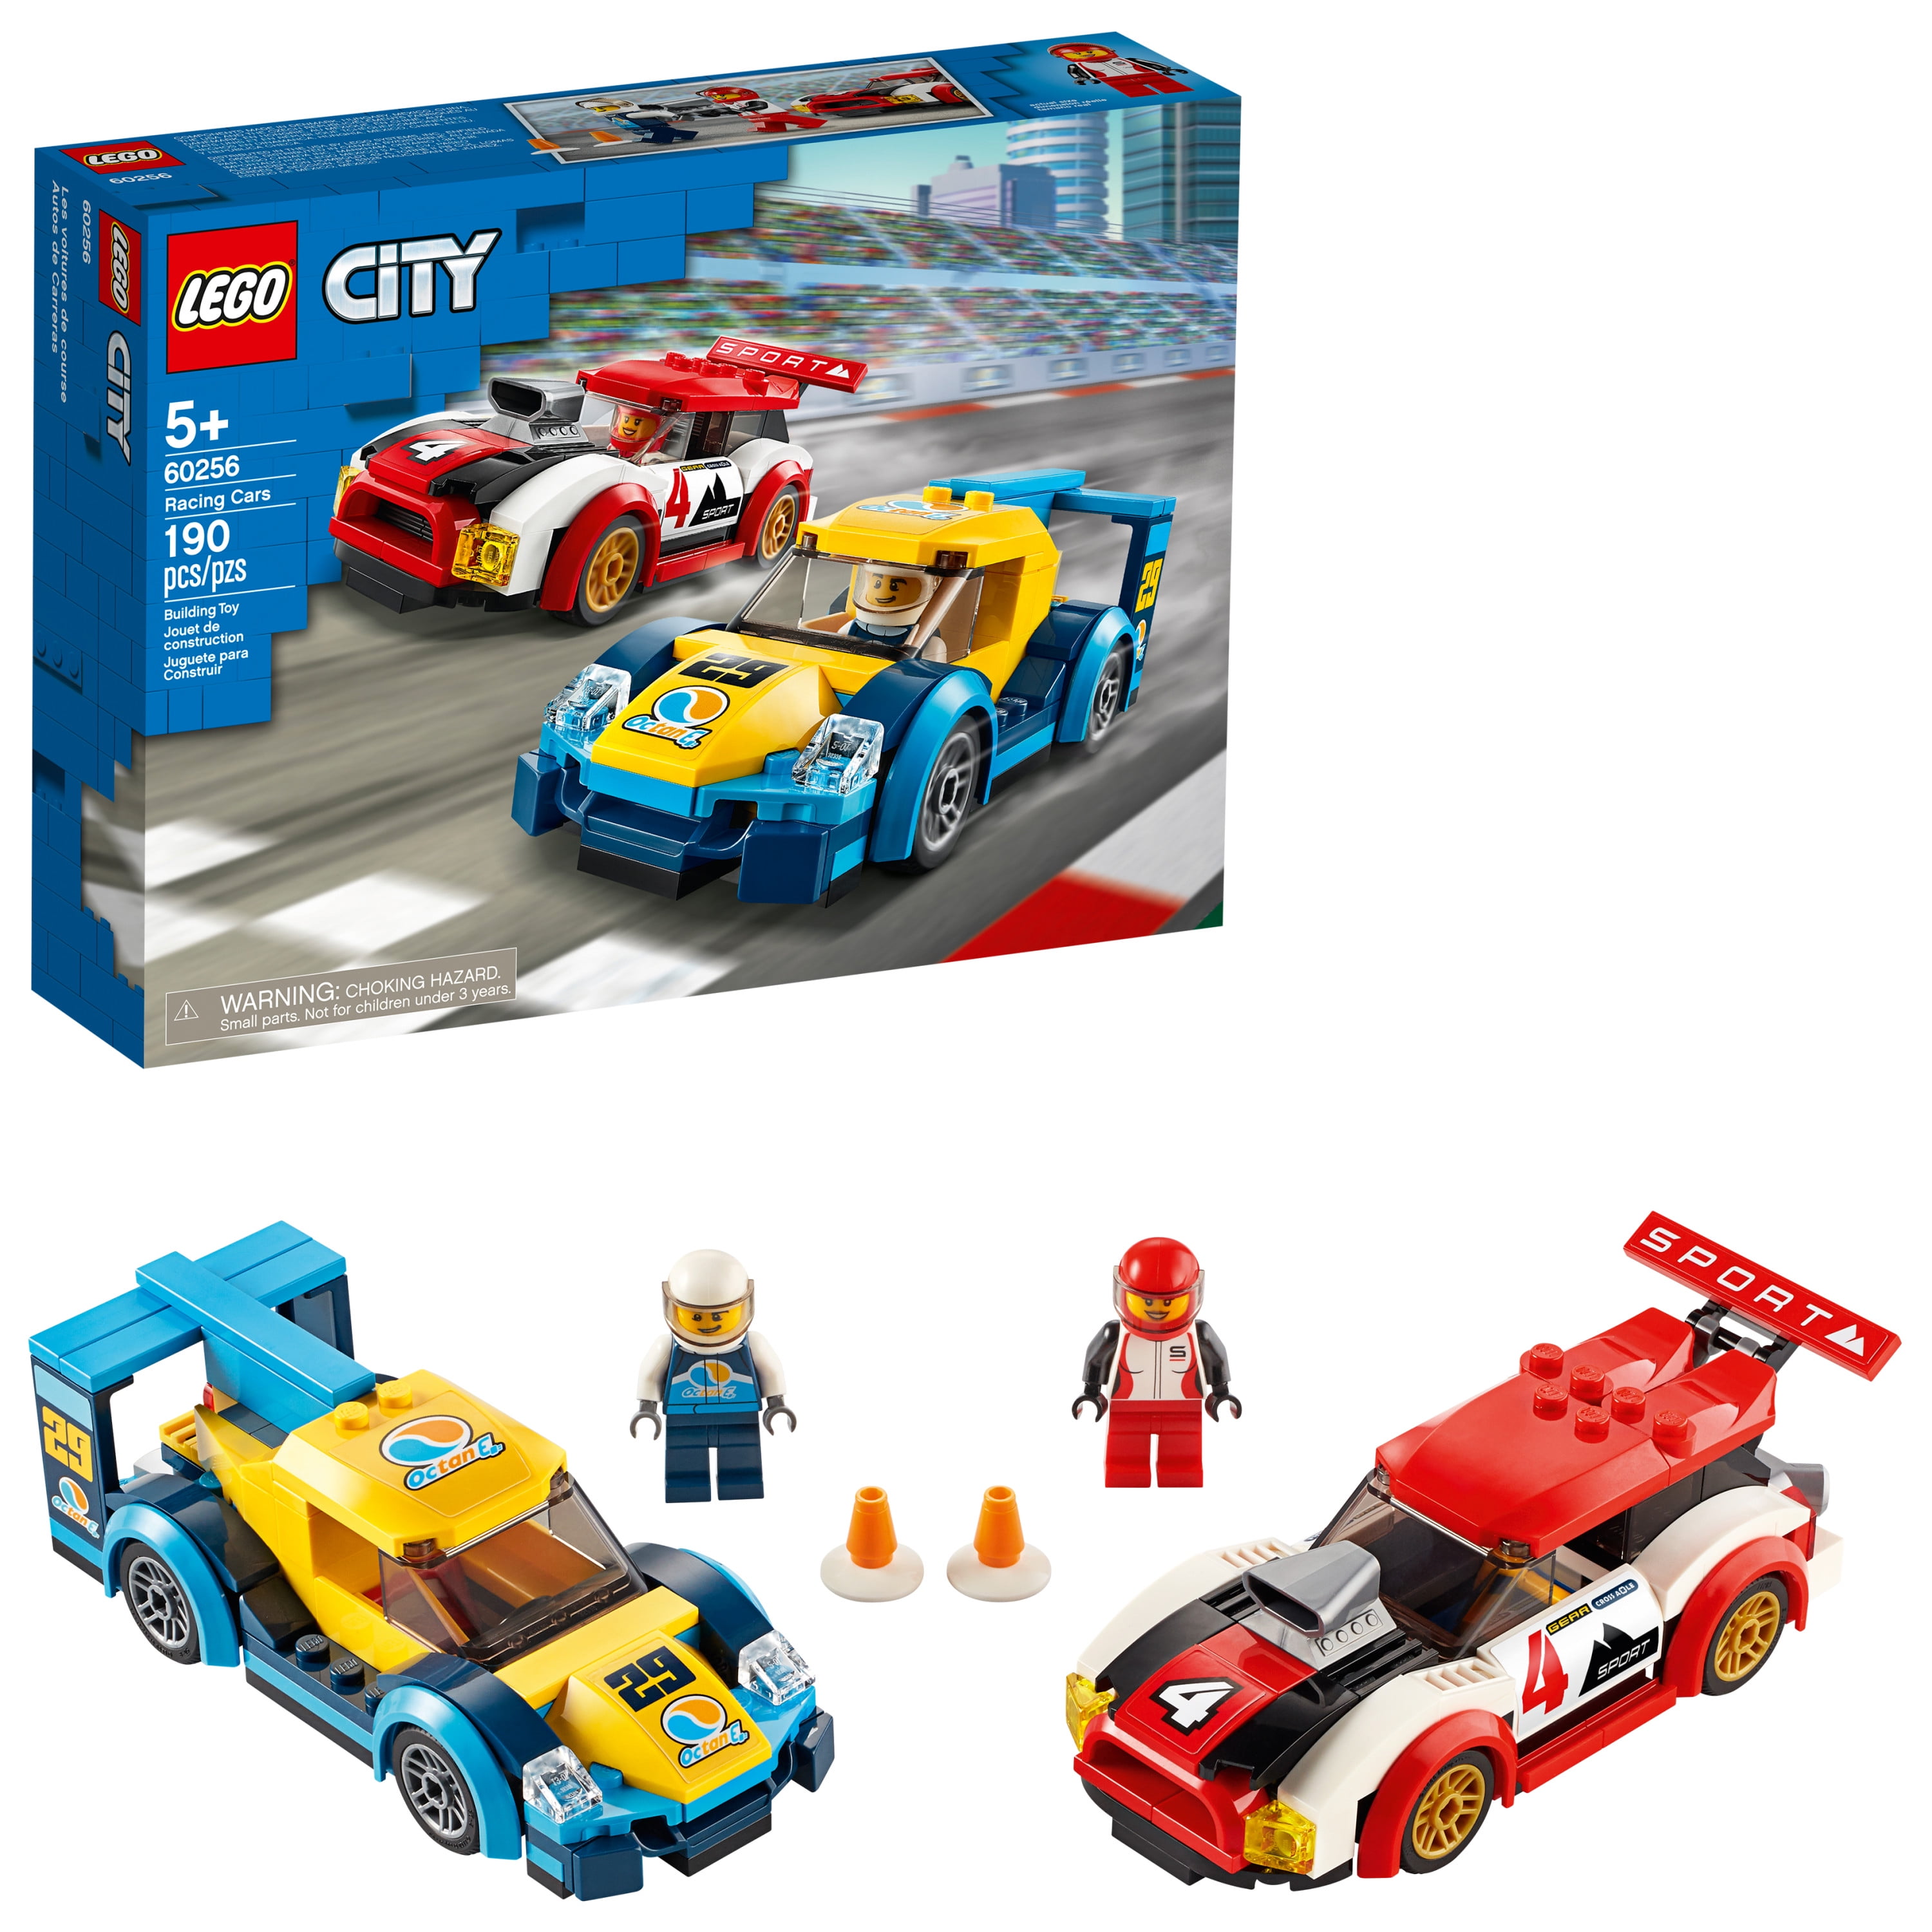 LEGO City 30349 Sports Car Polybag New Sealed Fast S/H Traffic Light